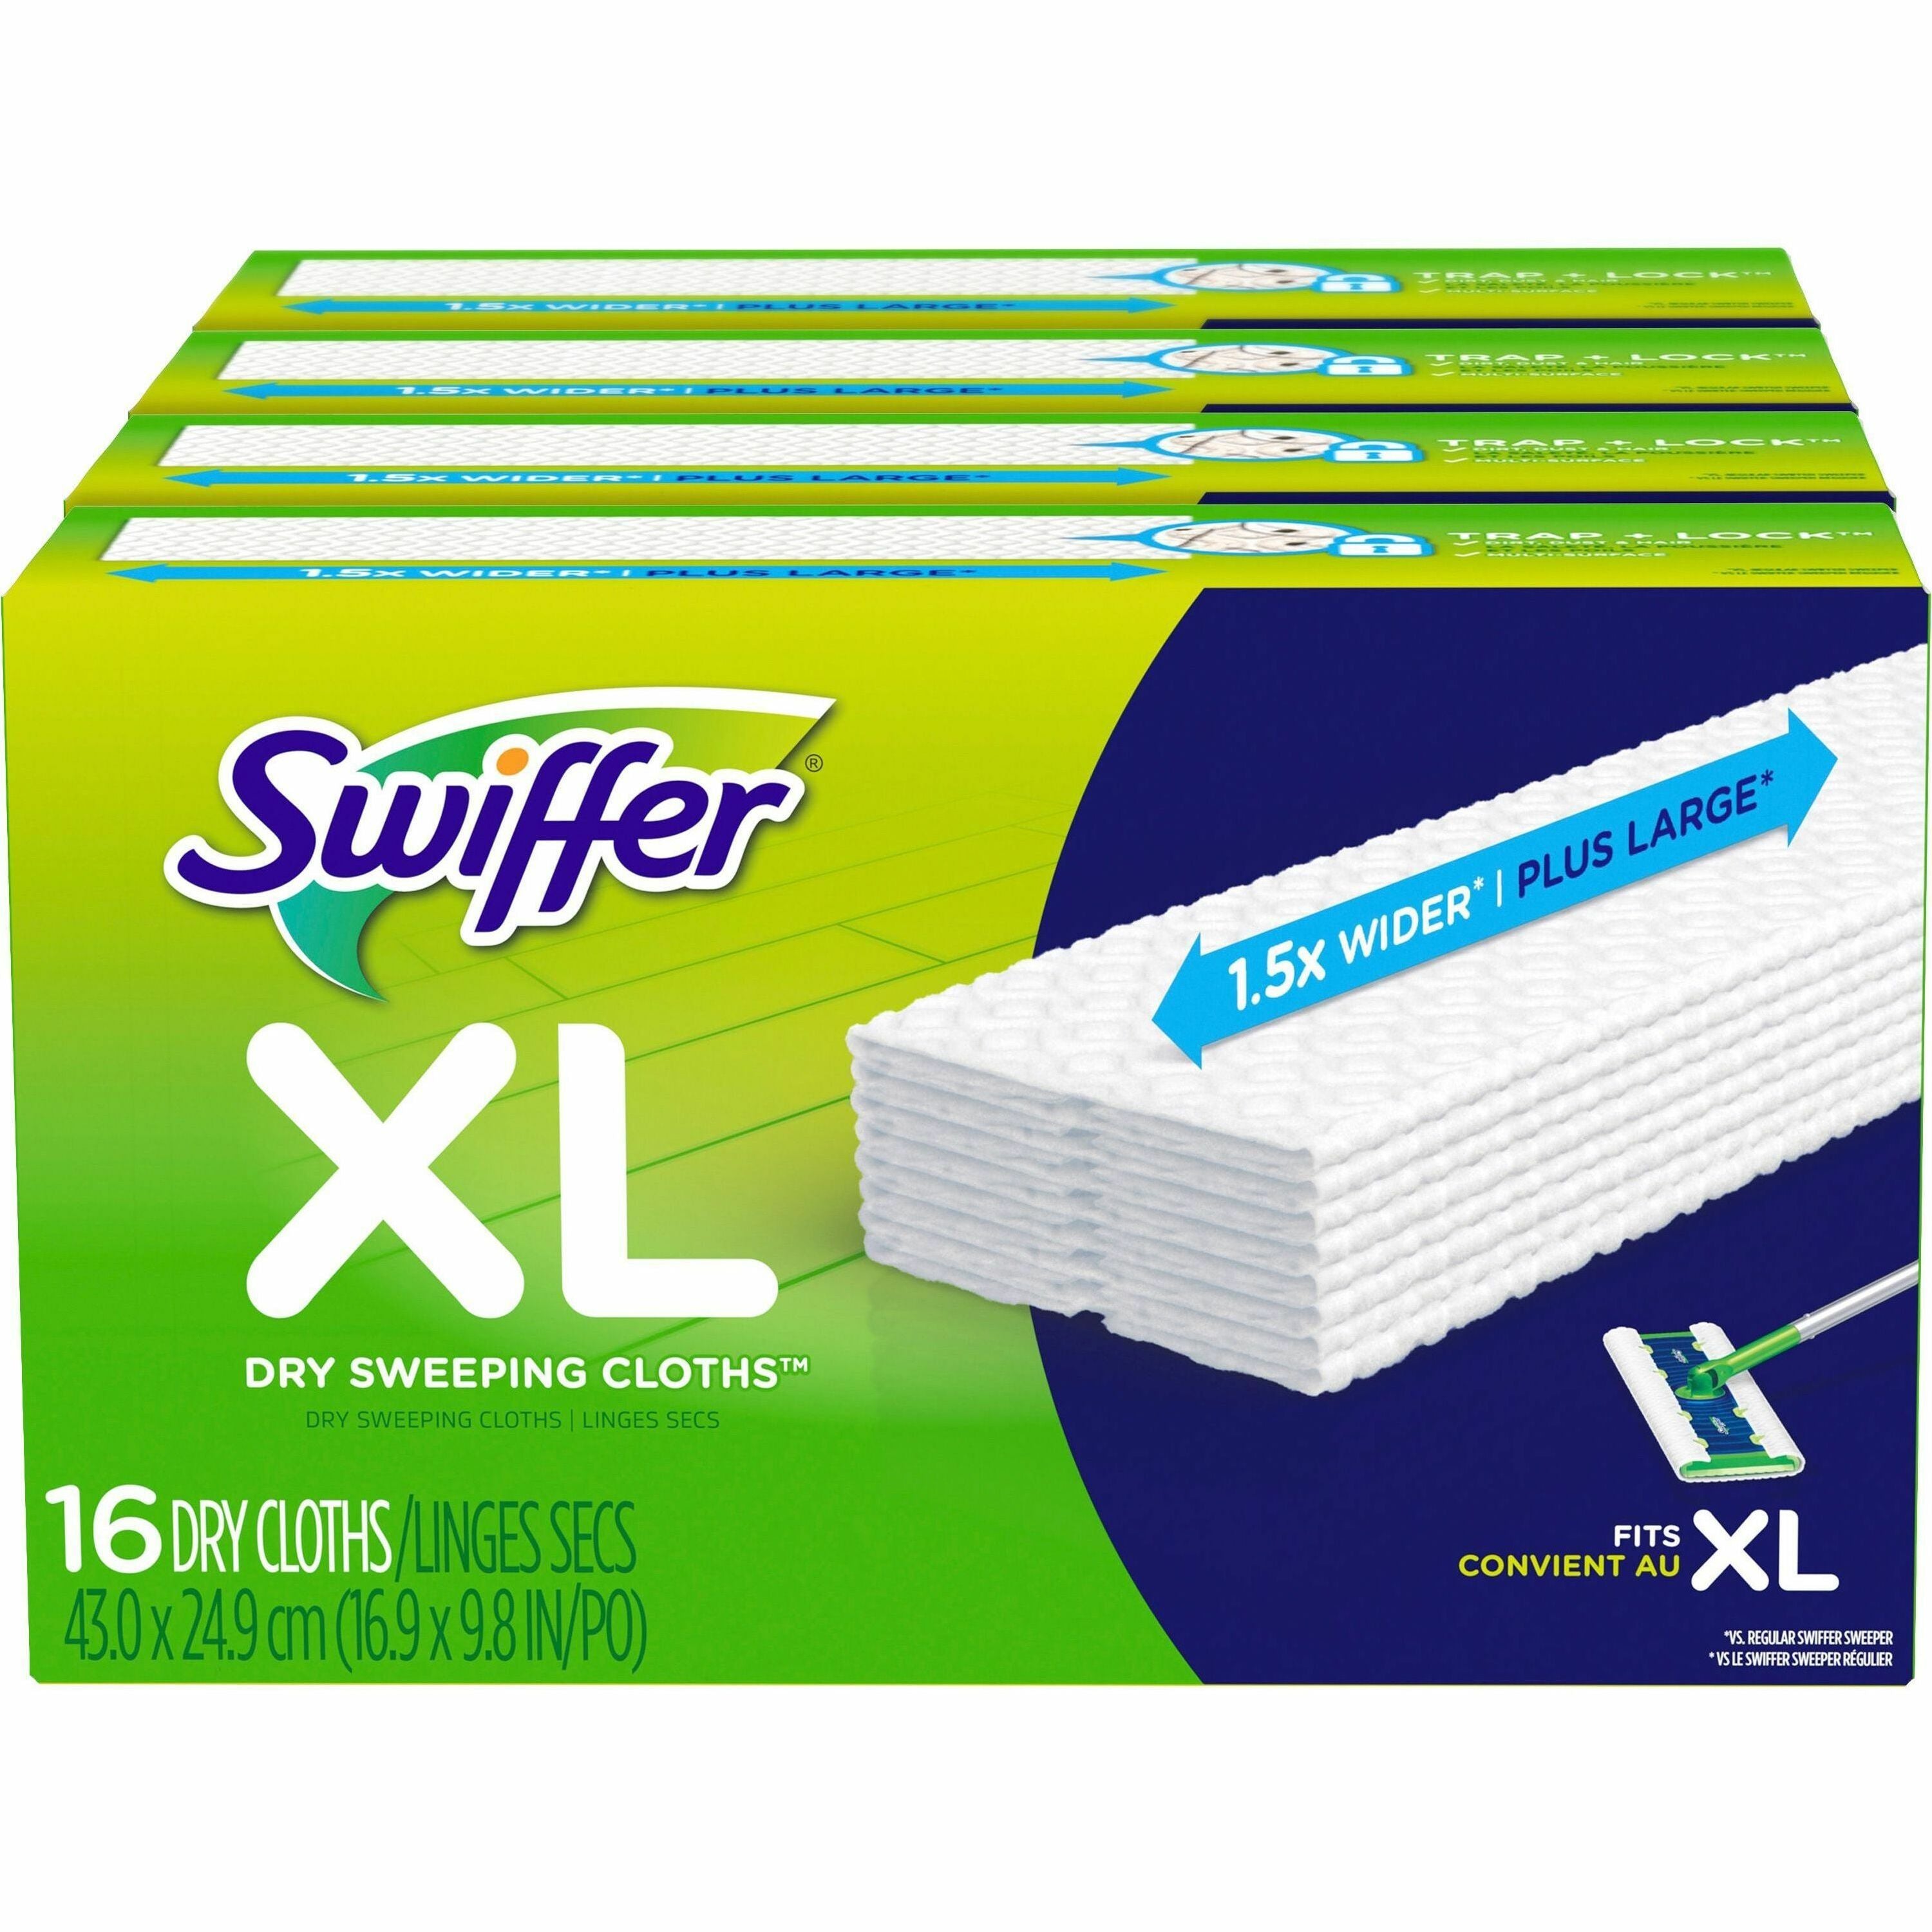 swiffer-sweeper-xl-dry-sweeping-cloths-x-large-white-16-per-box-4-carton_pgc96826ct - 1